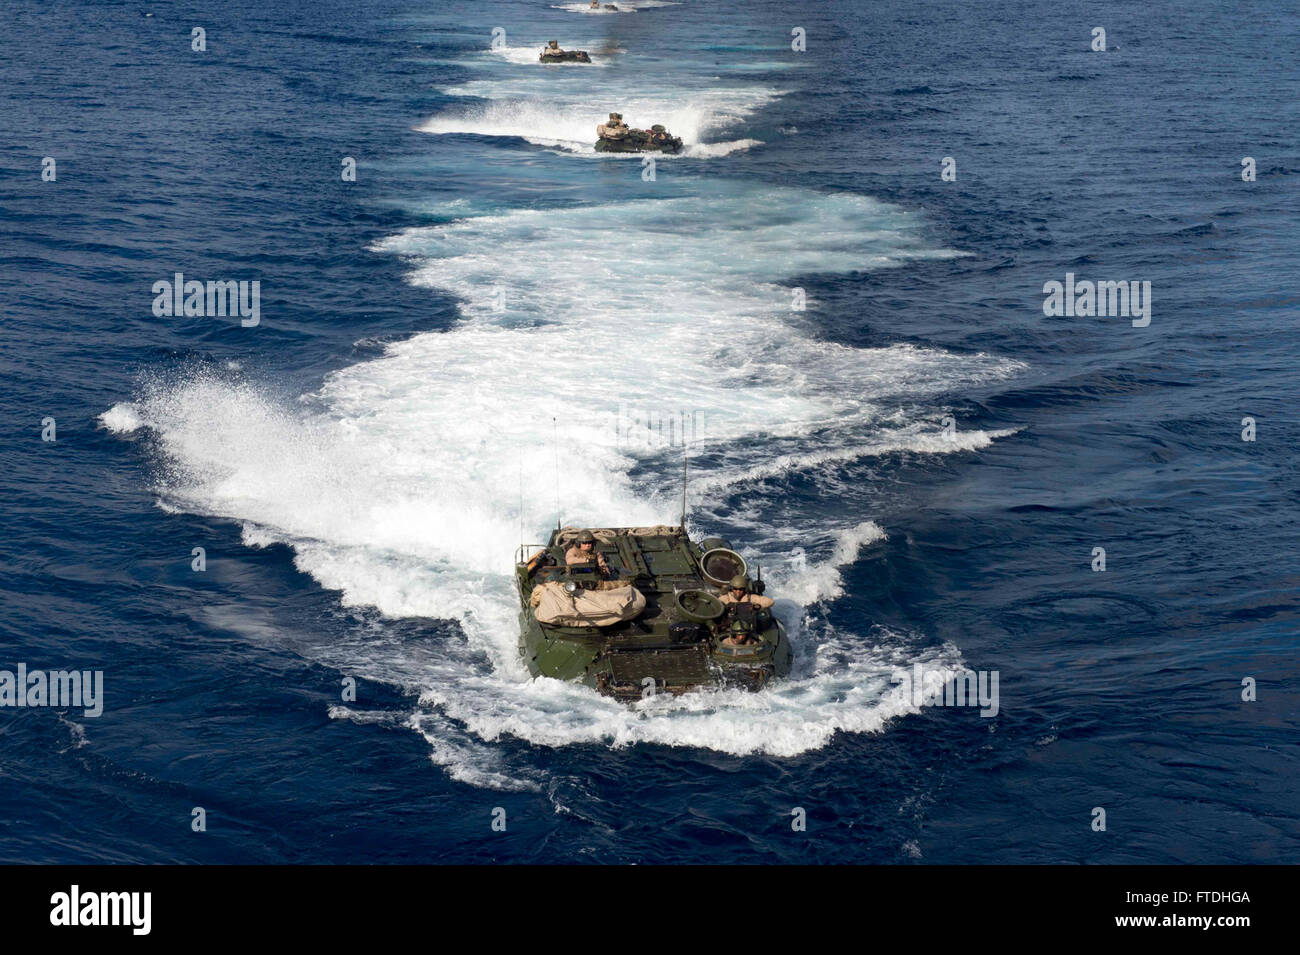 151028-N-JO245-957 MEDITERRANEAN SEA (Oct. 28, 2015) Amphibious assault vehicles from the 26th Marine Expeditionary Unit approach the well deck of the amphibious dock landing ship USS Oak Hill (LSD 51) Oct. 28, 2015. Oak Hill, deployed as part of the Kearsarge Amphibious Ready Group, is conducting naval operations in the U.S. 6th Fleet area of operations in support of U.S. national security interests in Europe. (U.S. Navy photo by Mass Communication Specialist 2nd Class Justin Yarborough/Released) Stock Photo